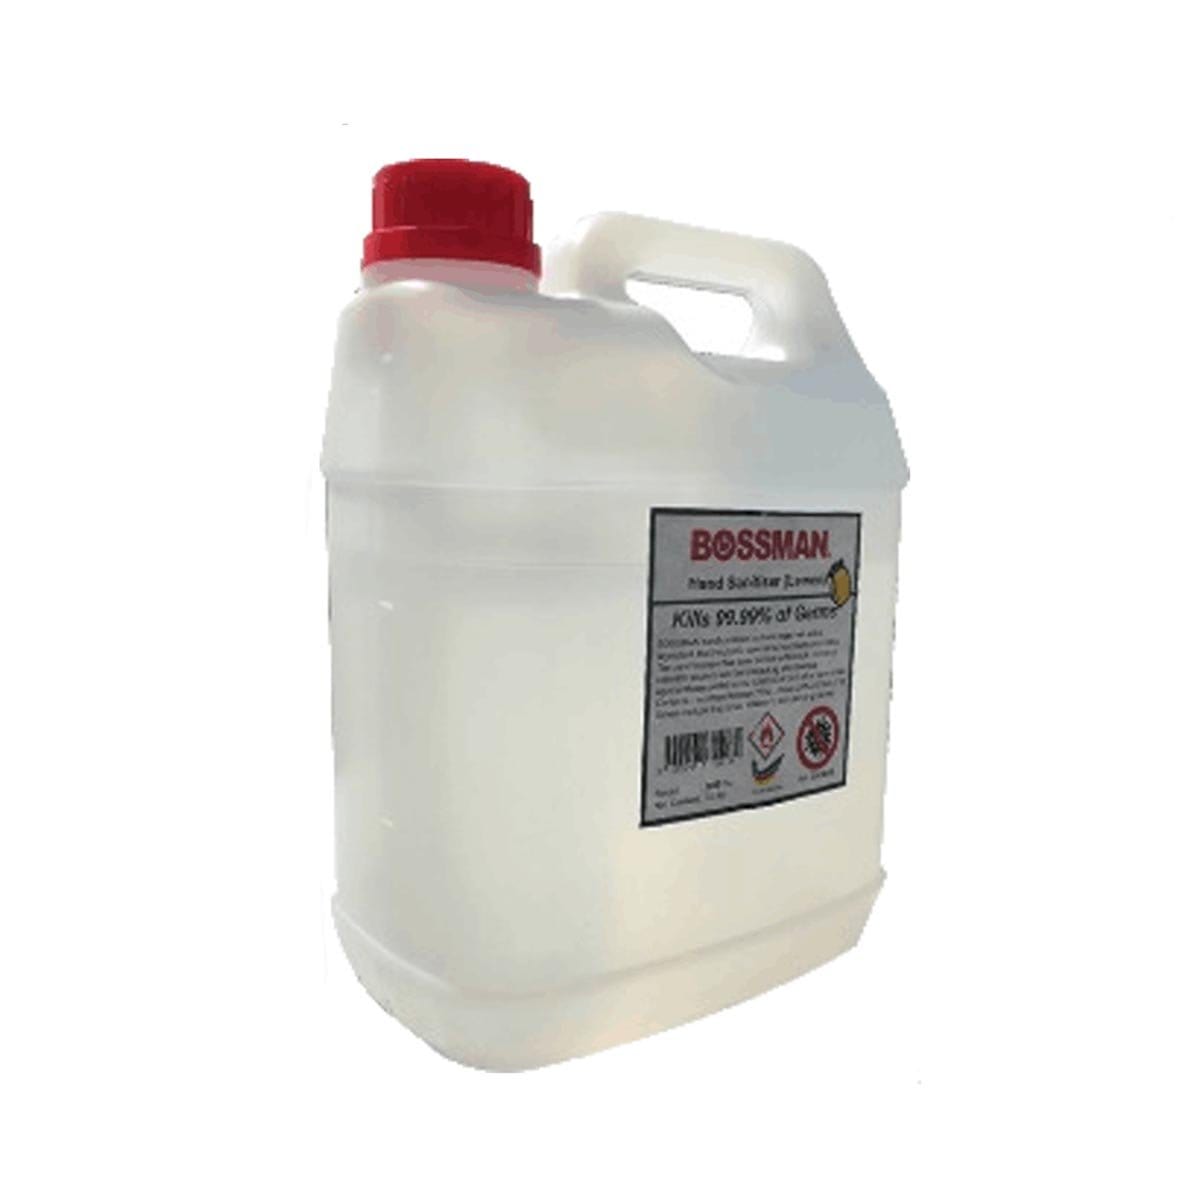 BOSSMAN Ready-to-Use Disinfectant 20L